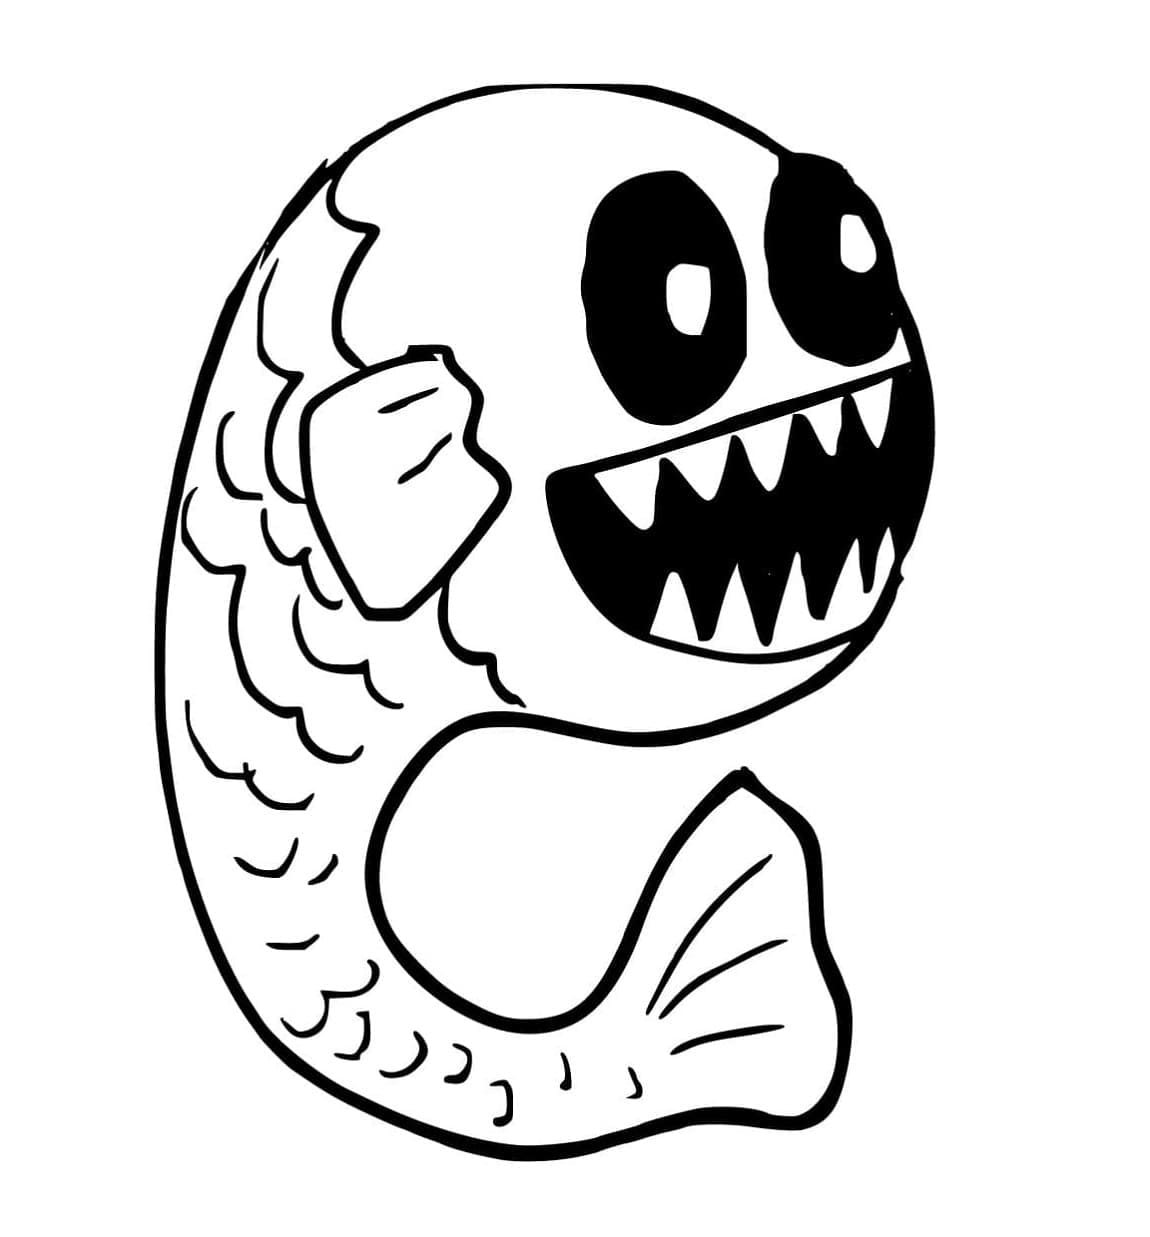 Printable Monster Fish Zoonomaly Coloring Page